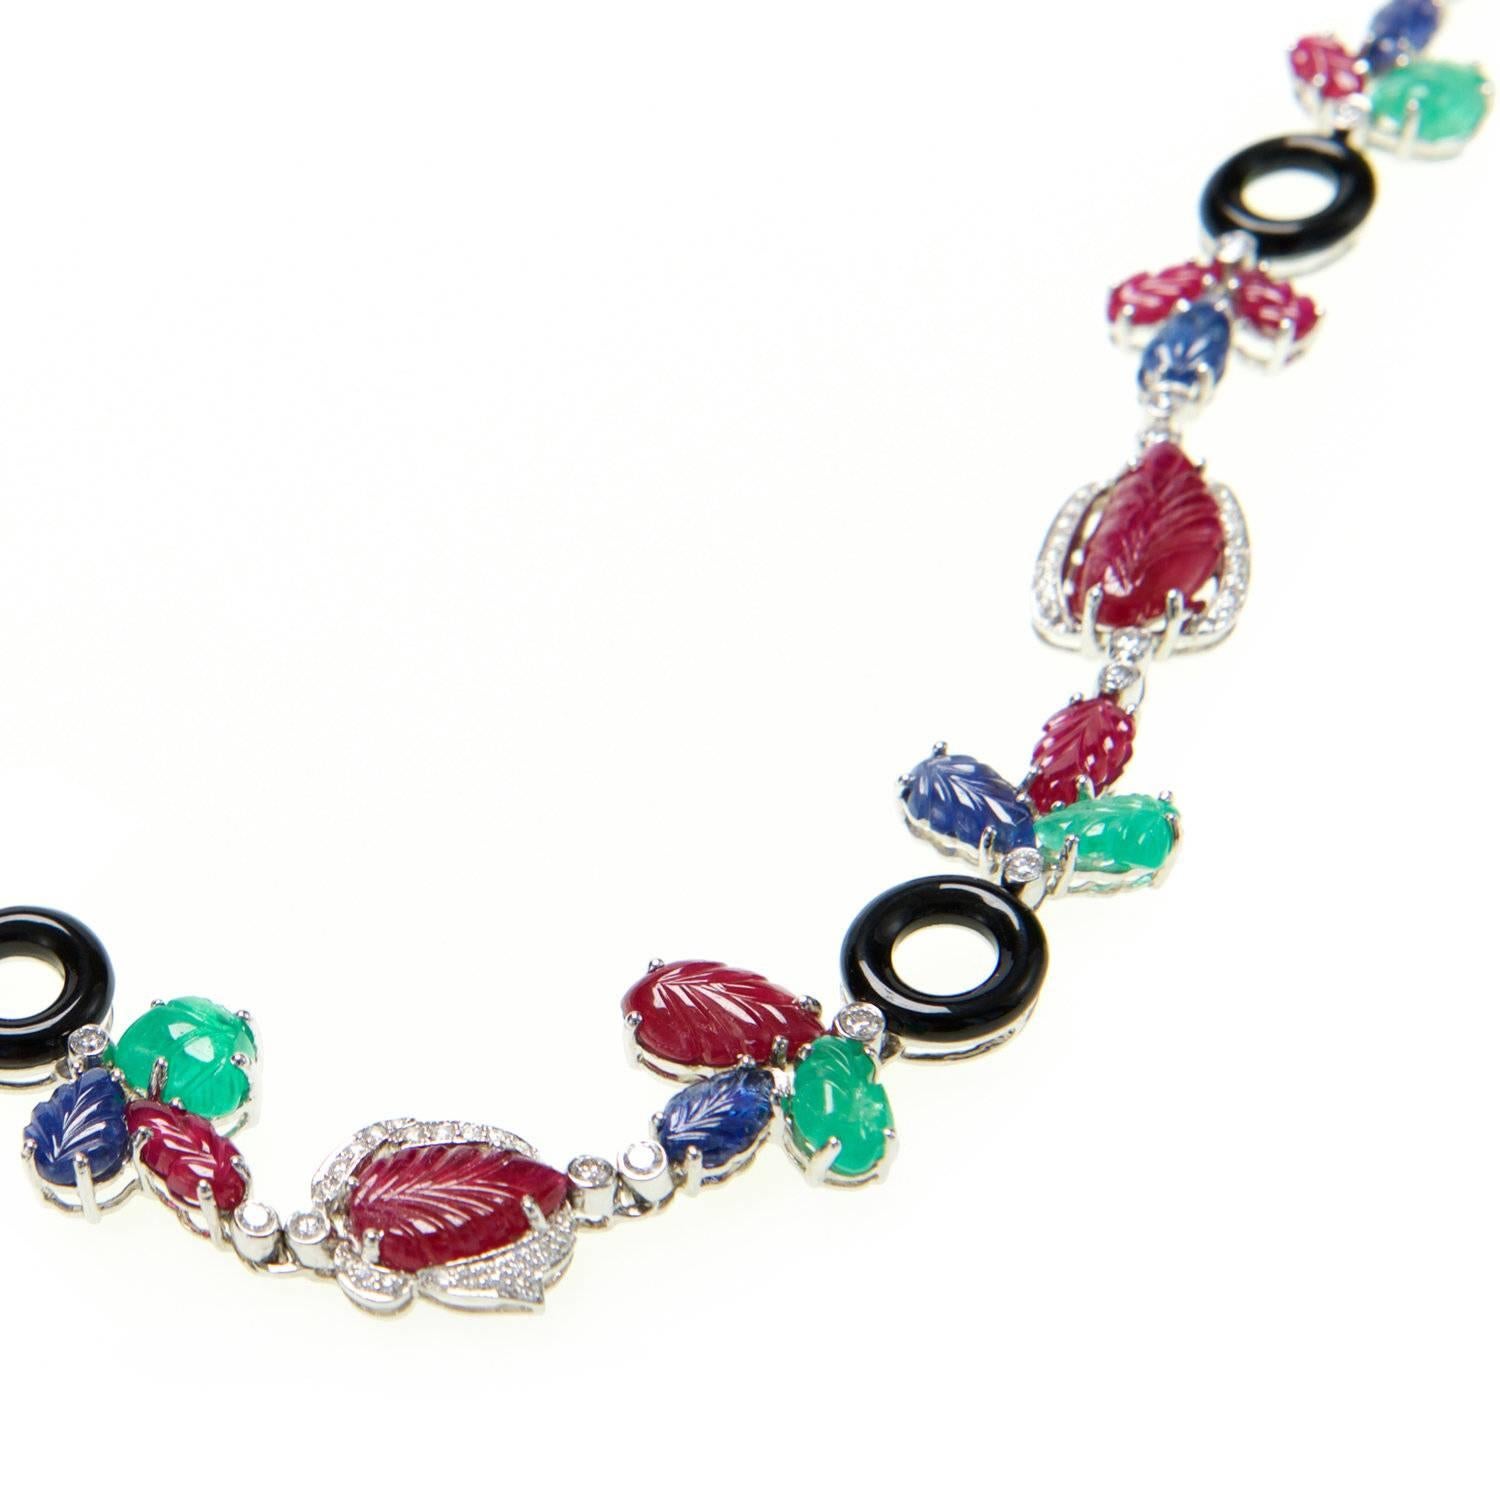 Ri Noor's Multi Gem Necklace is a striking statement piece that features an assorted collection of jewels including white diamonds, rubies, sapphires, emeralds, and onyx all set in 18k white gold. The colorful gemstones are carved and set in a